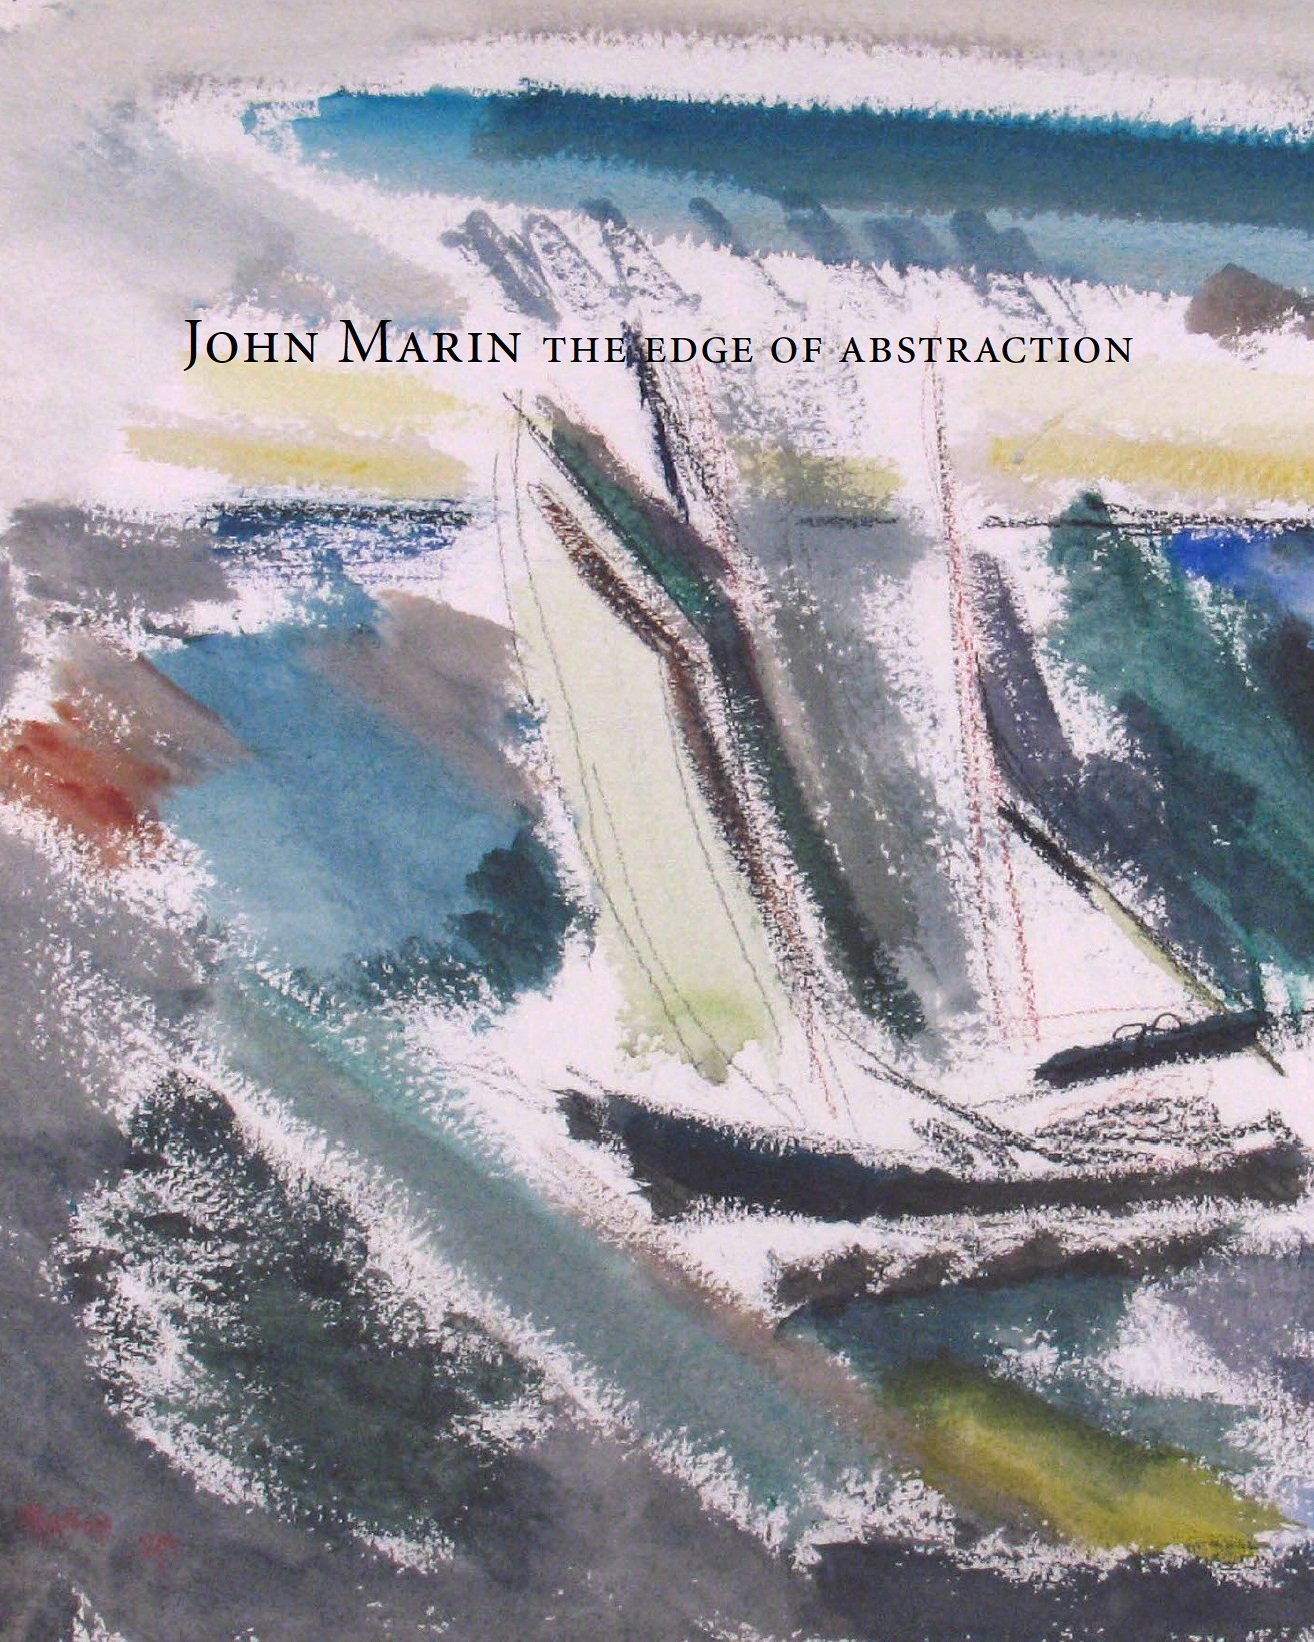 John Marin: # The Edge of Abstraction # 2006 &lt;alt="Catalogue cover with title over watercolor of a sailboat on a stormy sea in blues, greens, and greys."&gt; 